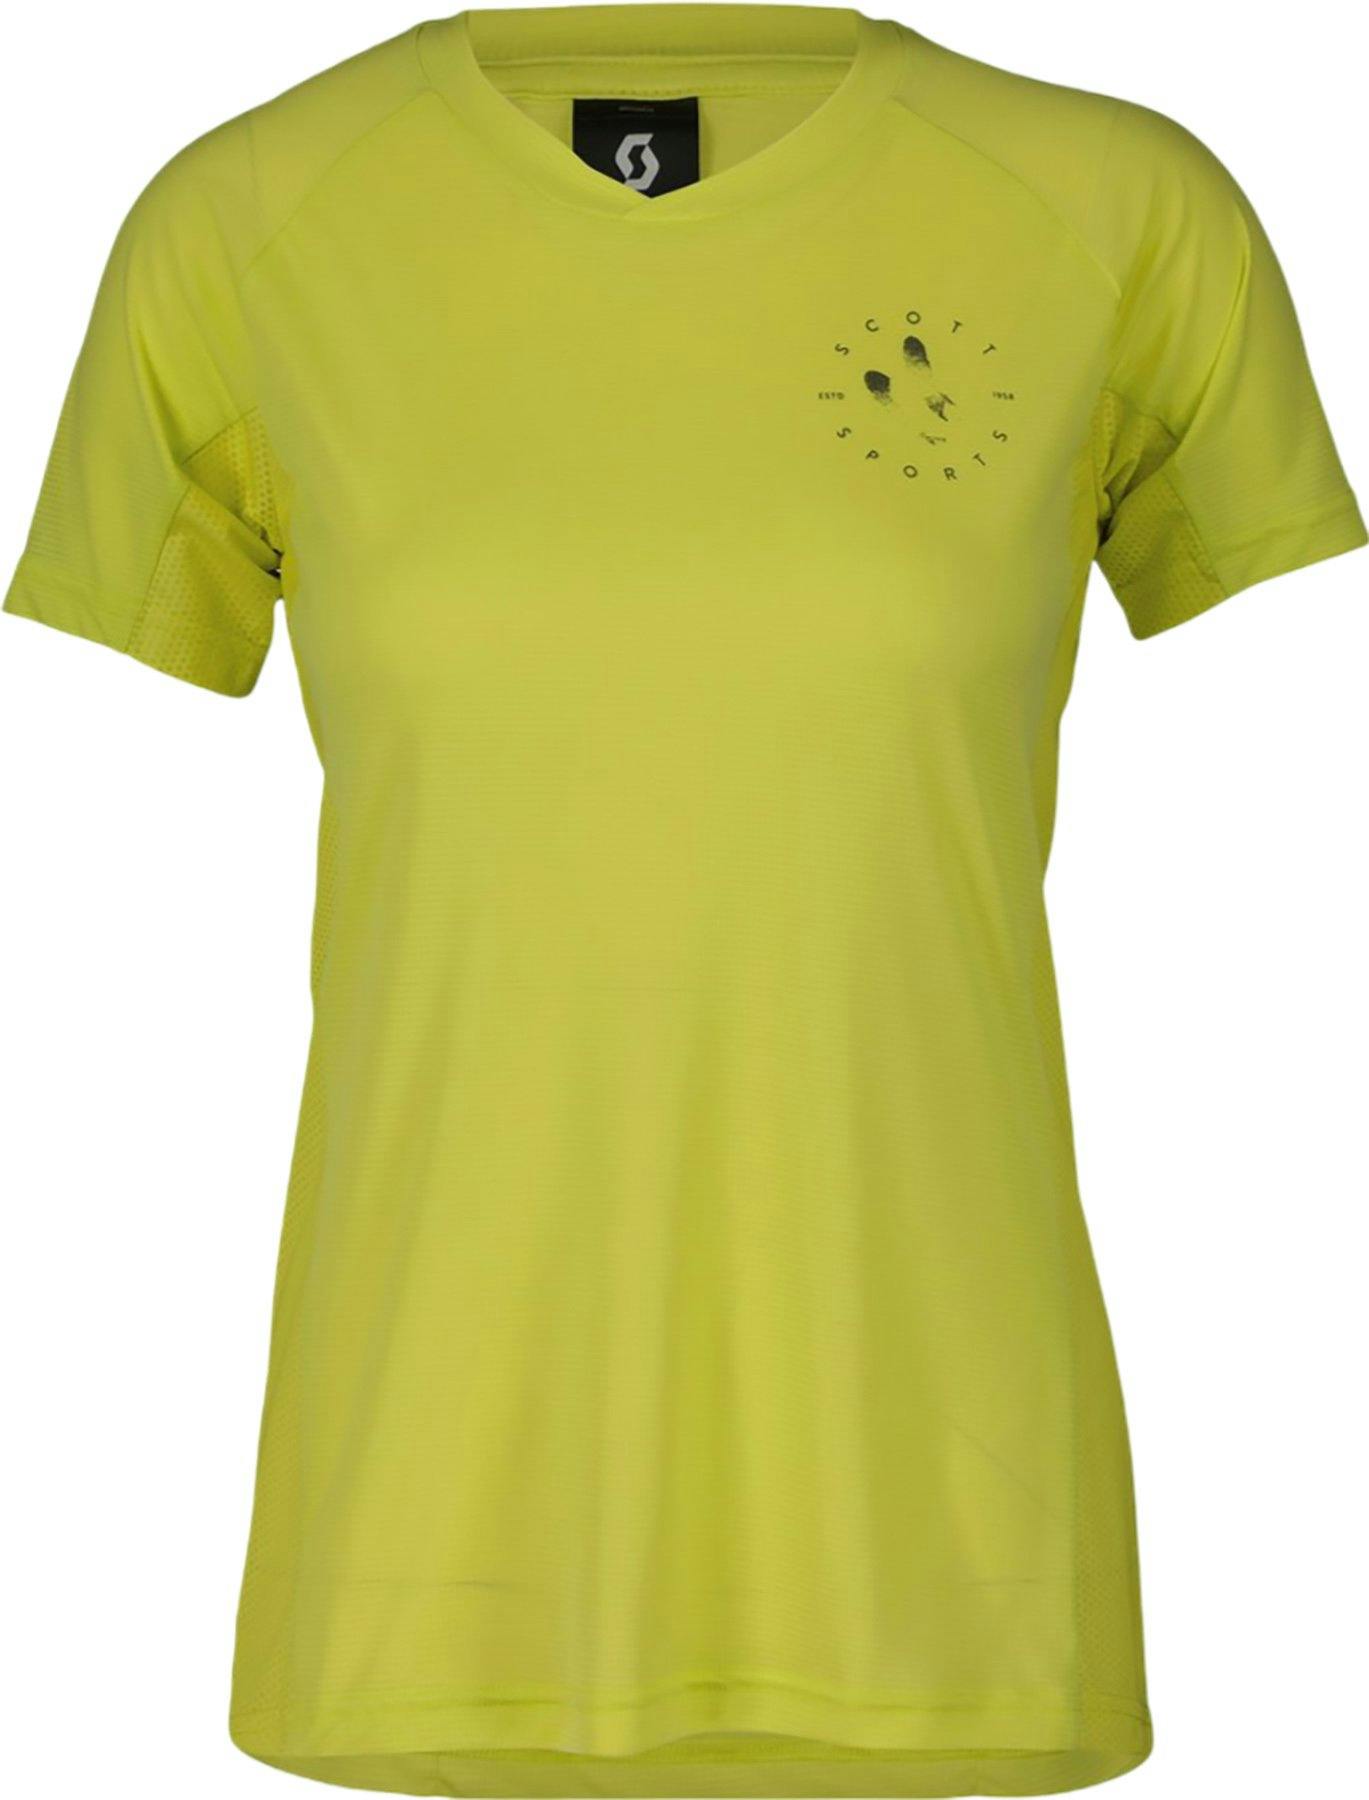 Product image for Trail Flow Pro Short-Sleeve T-Shirt - Women's